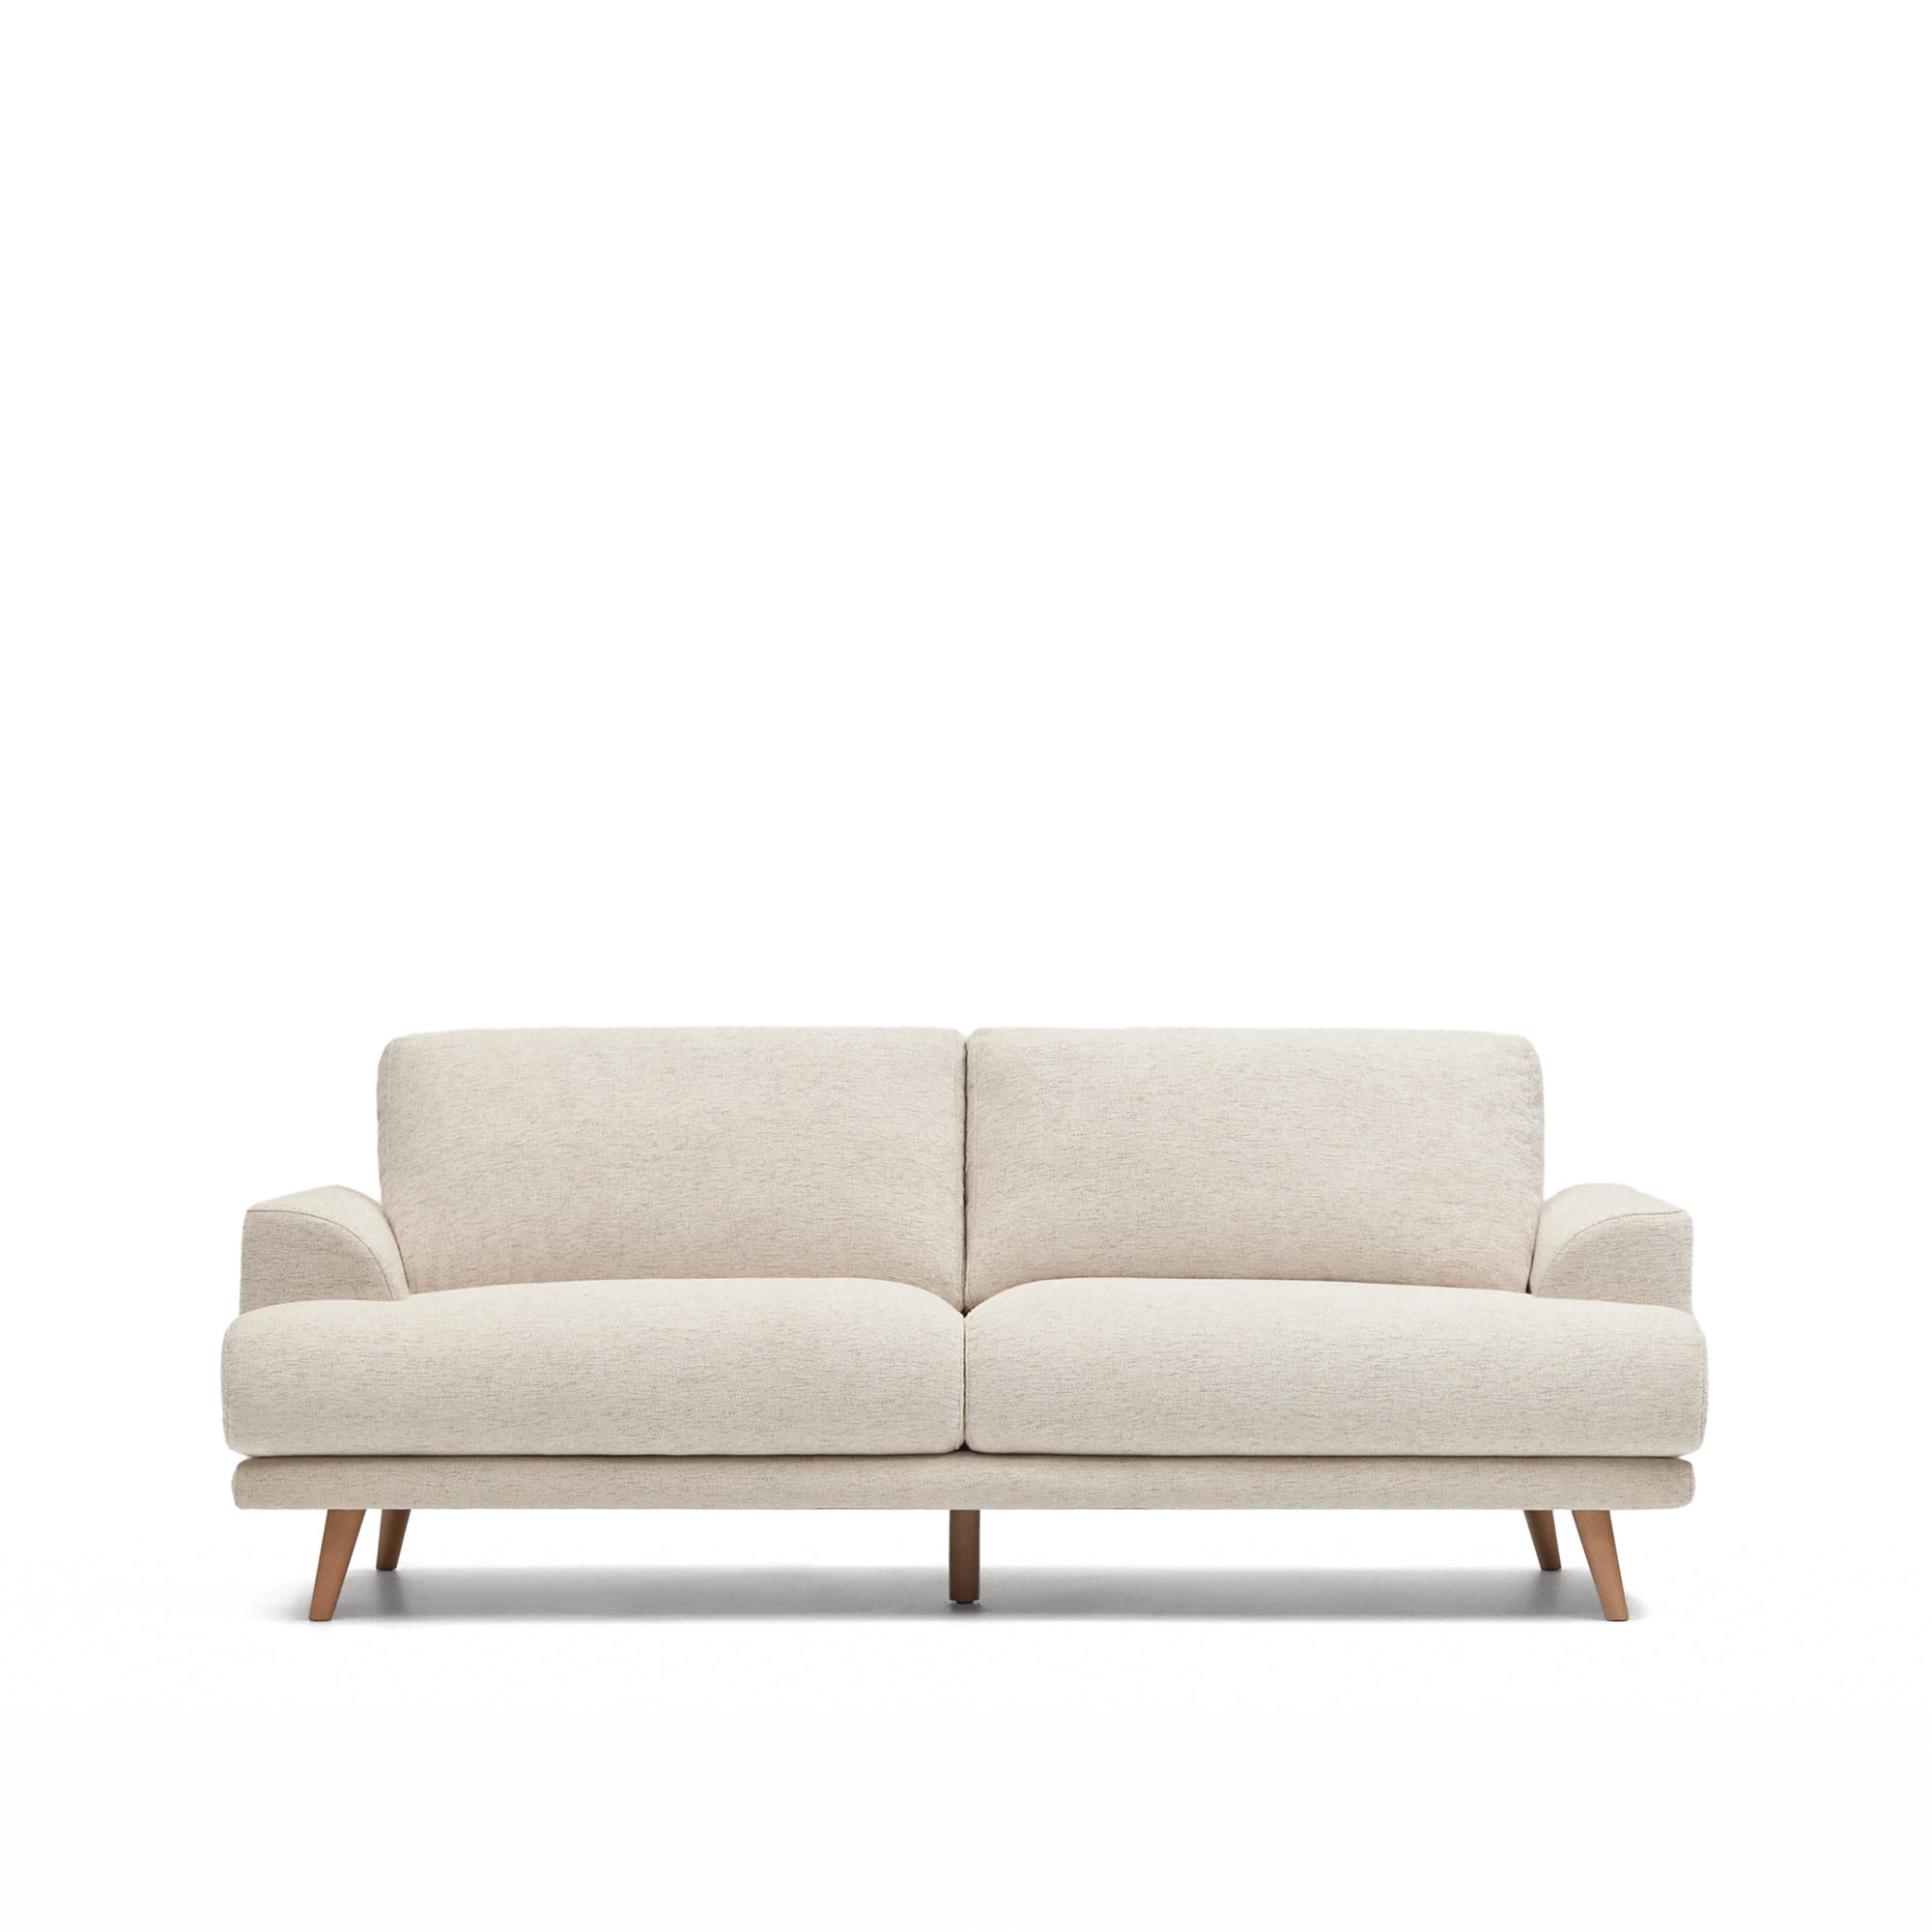 Karin 2 seater sofa in beige with solid beech wood legs, 210 cm